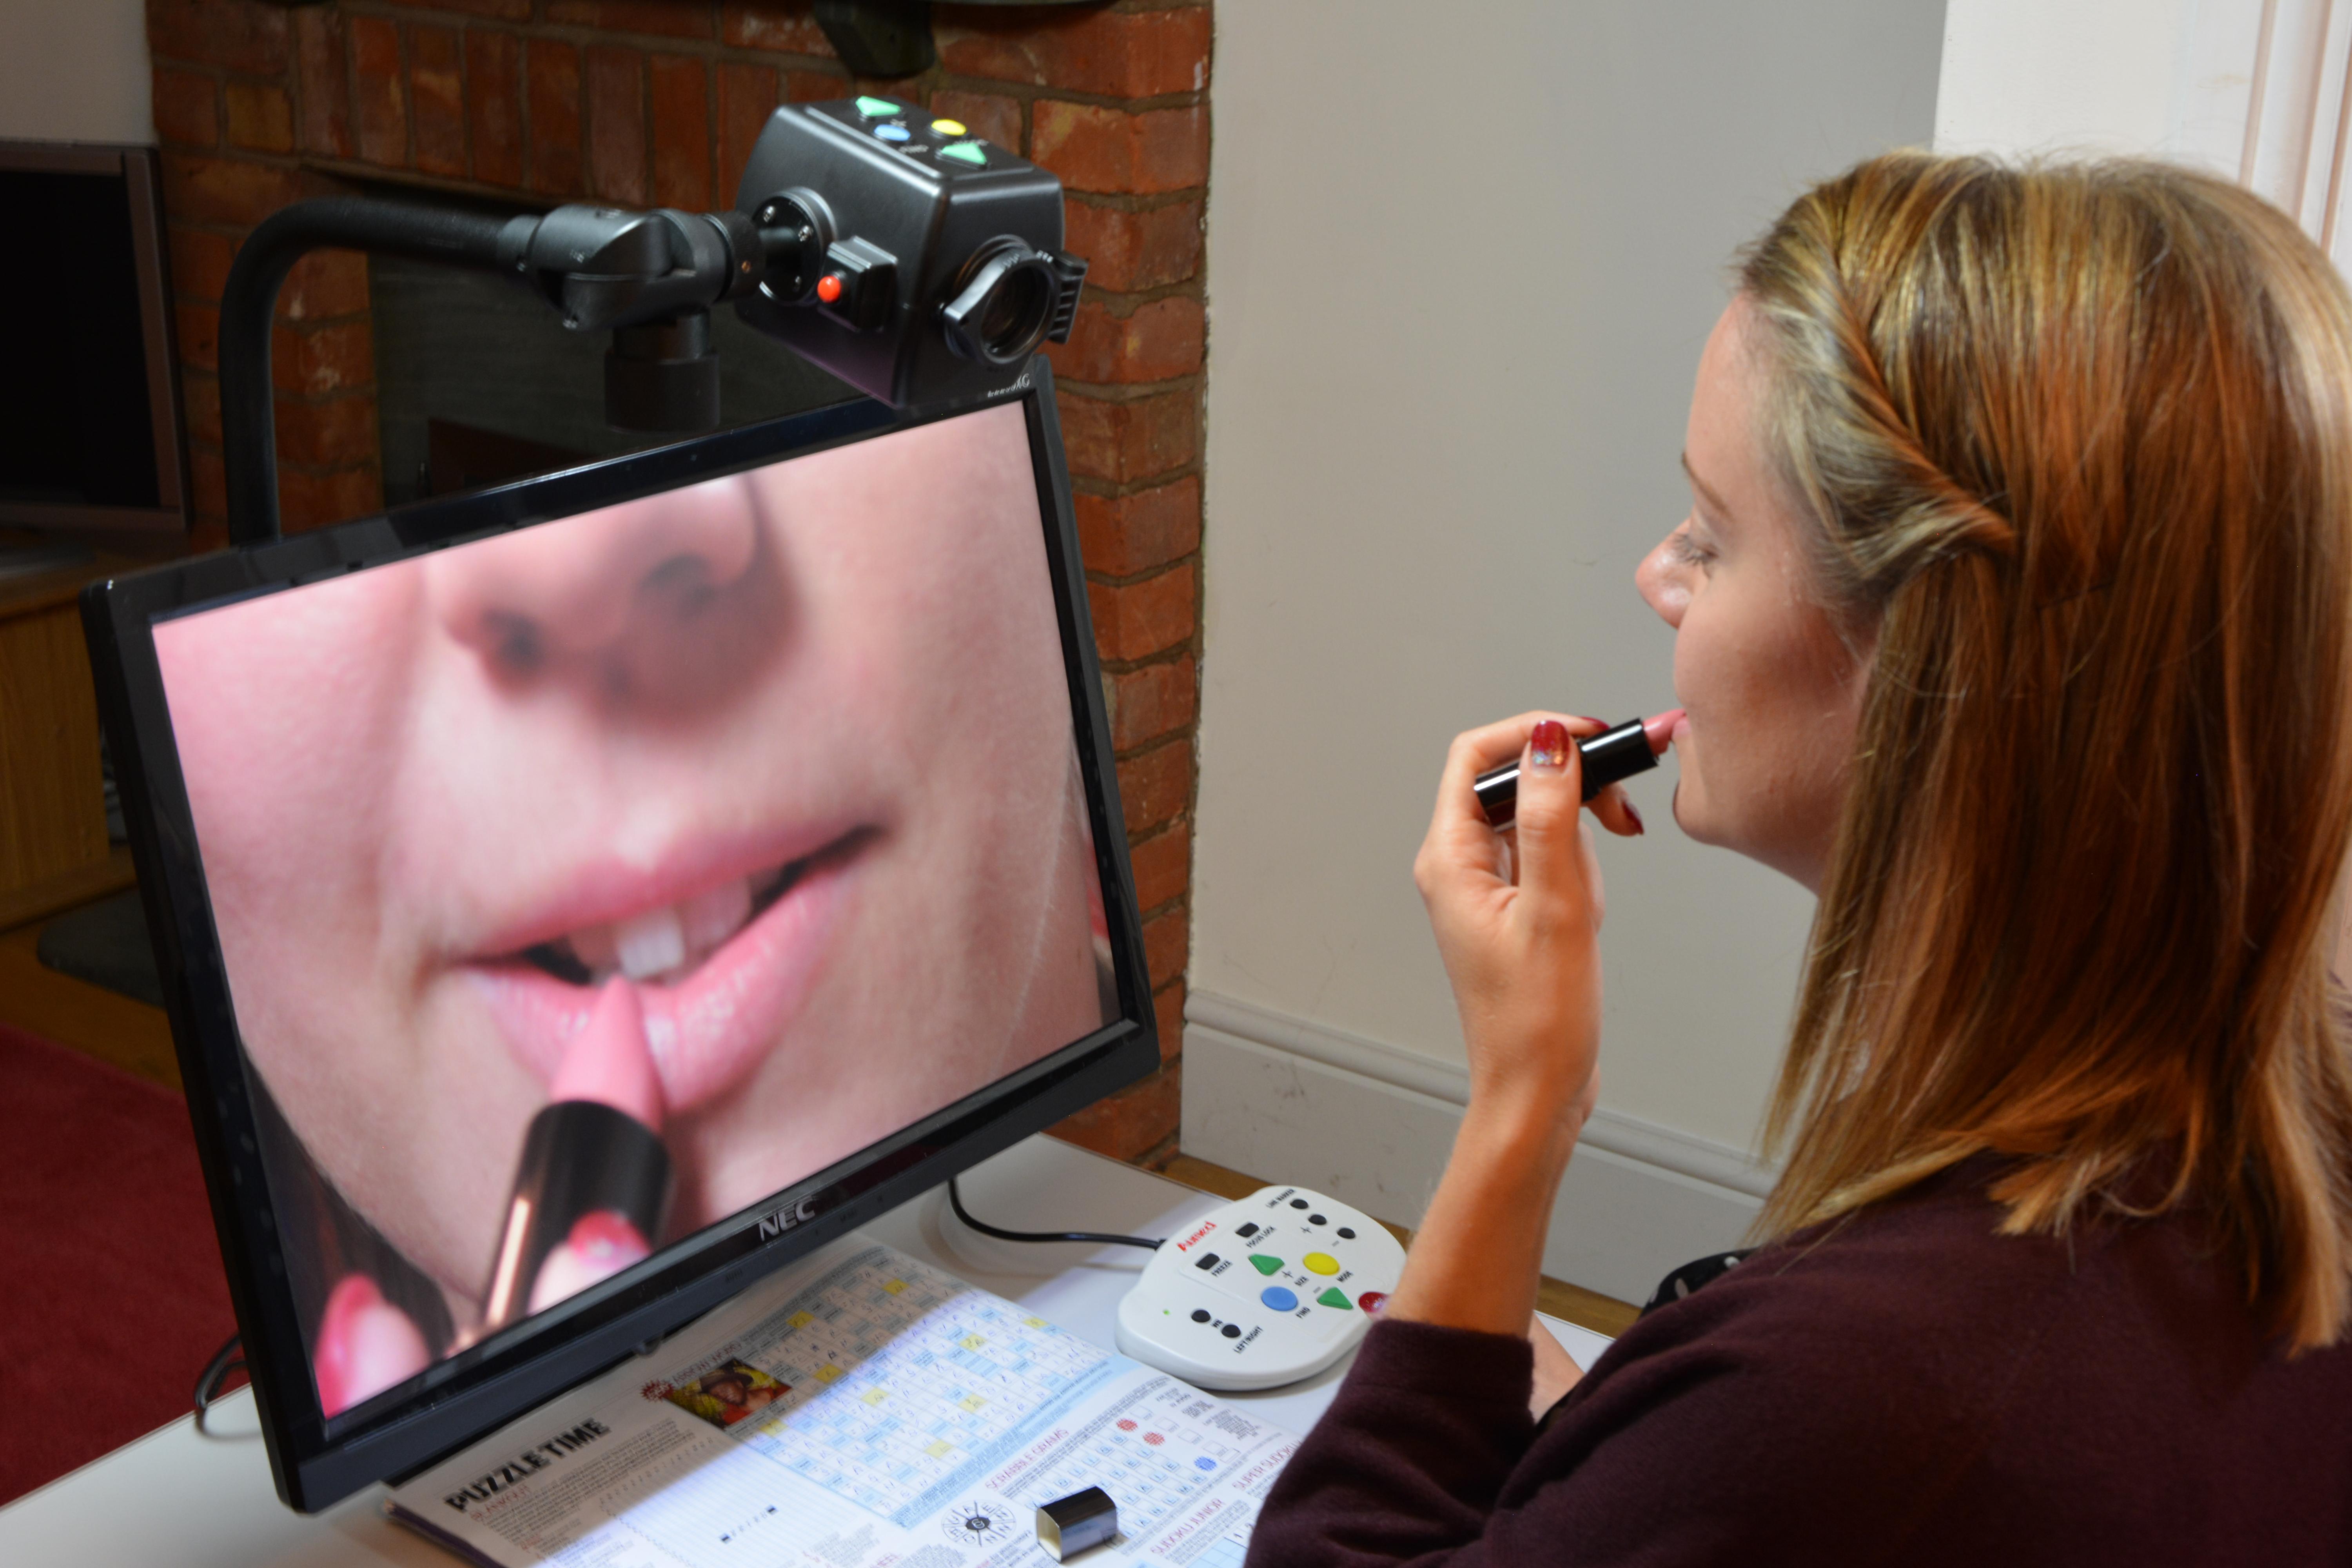 A lady using her digimax in self viewing mode, applying her lipstick